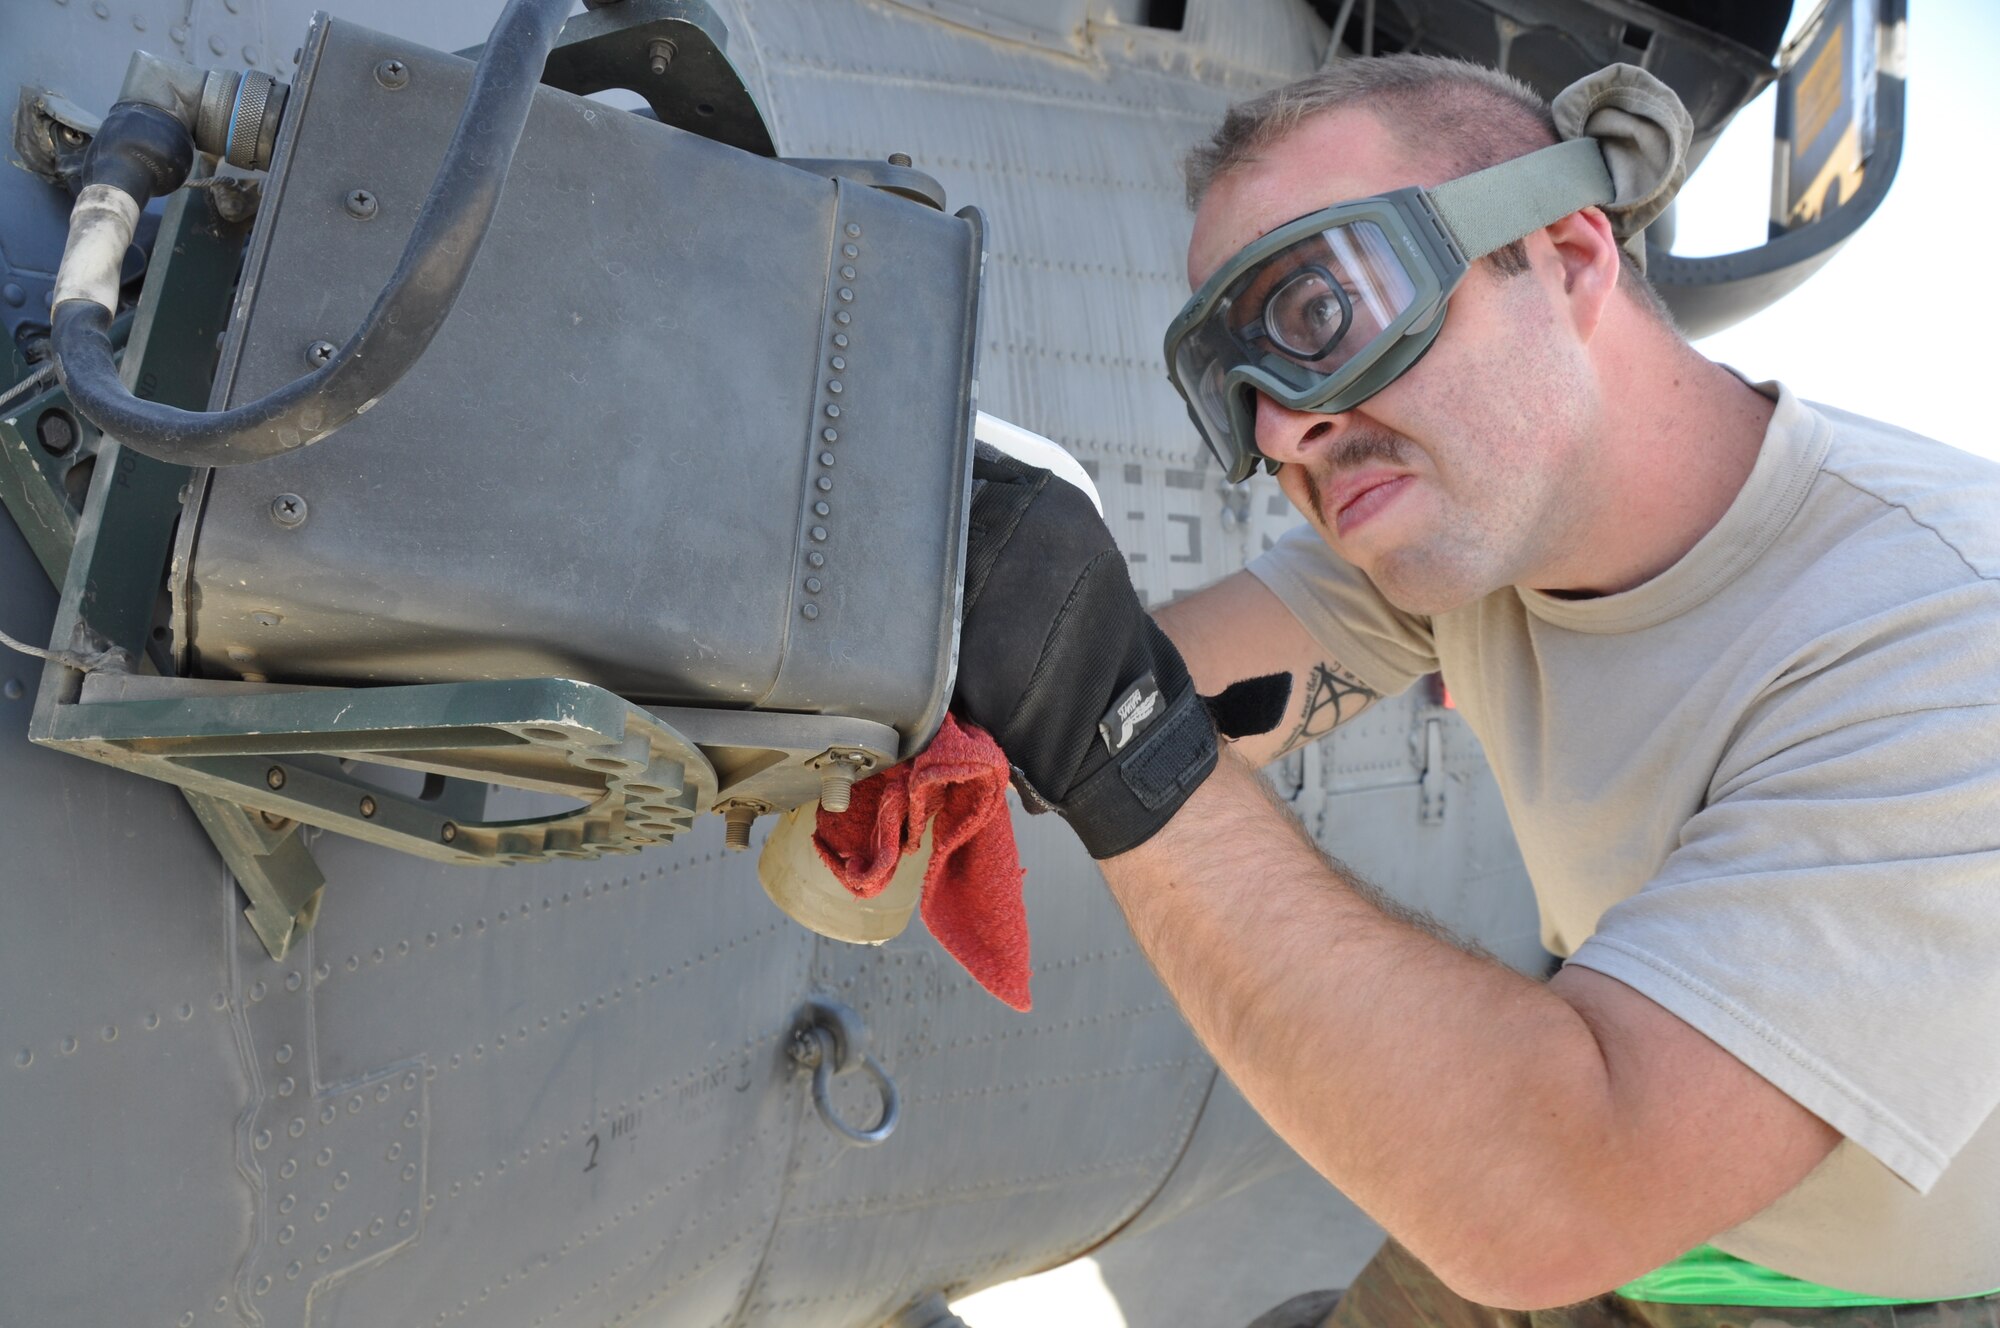 Staff Sgt. Kolby Kell, 455th Expeditionary Maintenance Squadron electronic warfare craftsmen, helps conduct a 50-hour preventative maintenance inspection on aircraft 89-6205, an HH-60G Pave Hawk helicopter assigned to the 56th Expeditionary Helicopter Maintenance Unit at Bagram Airfield, Afghanistan, July 24, 2013. The helo achieved the coveted black-letter initial exceptional release July 23, 2013, for the first time in the unit since 2005. After the ER was signed, the HH-60 launched as part of a mission attributed to saving two lives later the same day. Aircraft 89-6205 happens to be the same aircraft that attained the status for the unit eight years ago. (U.S. Air Force photo/Tech. Sgt. Rob Hazelett)